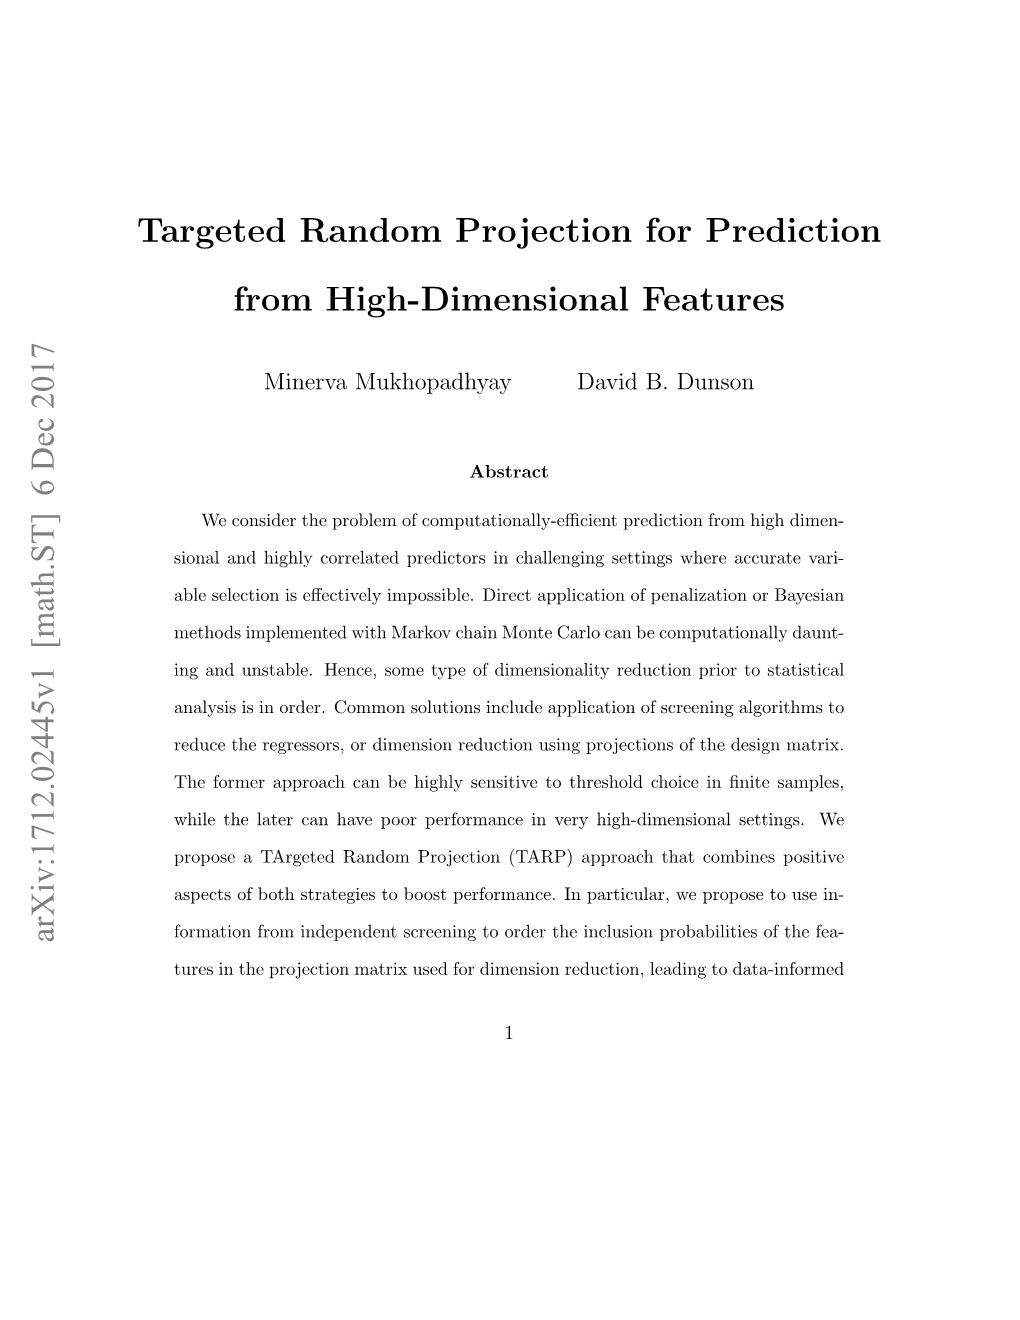 Targeted Random Projection for Prediction from High-Dimensional Features